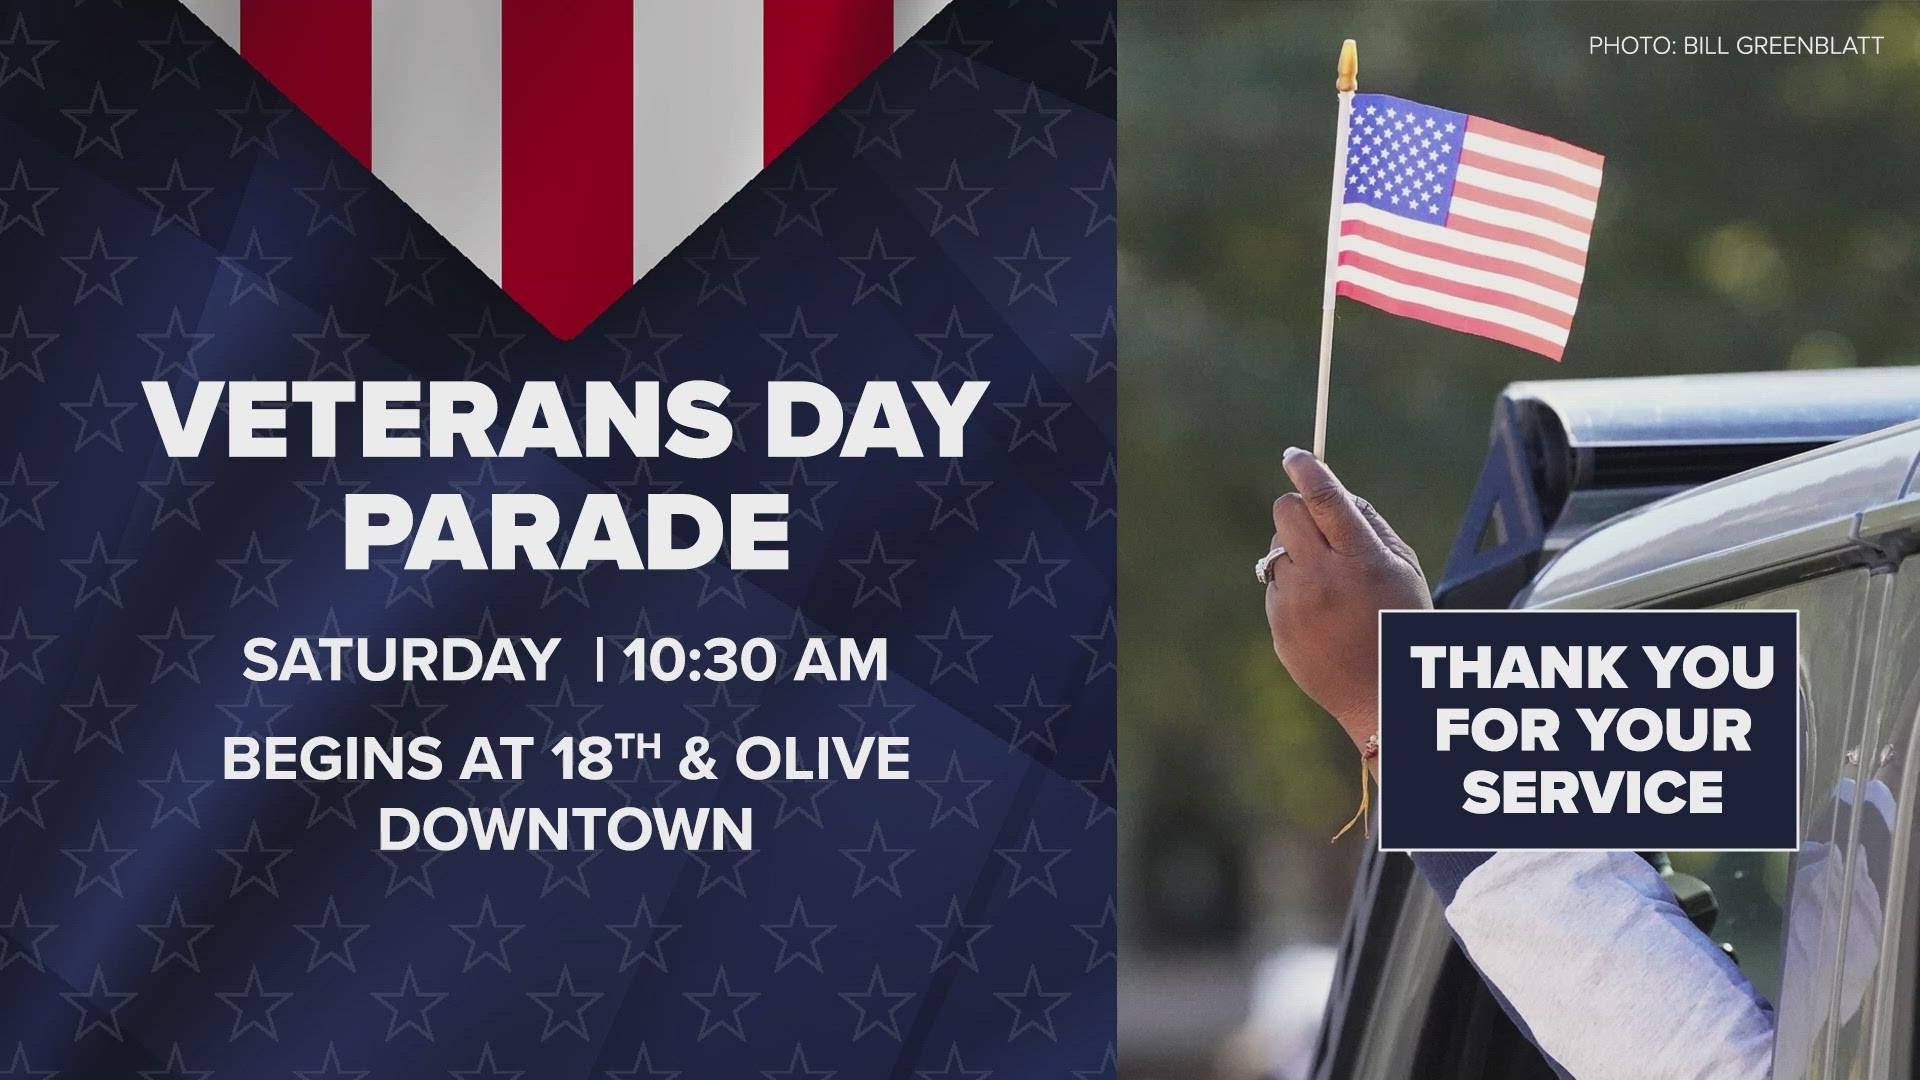 The 40th Annual Veterans Day Parade in downtown St. Louis begins at 10:30 a.m. Saturday. The 5 On Your Side live bus will be rolling along the route.